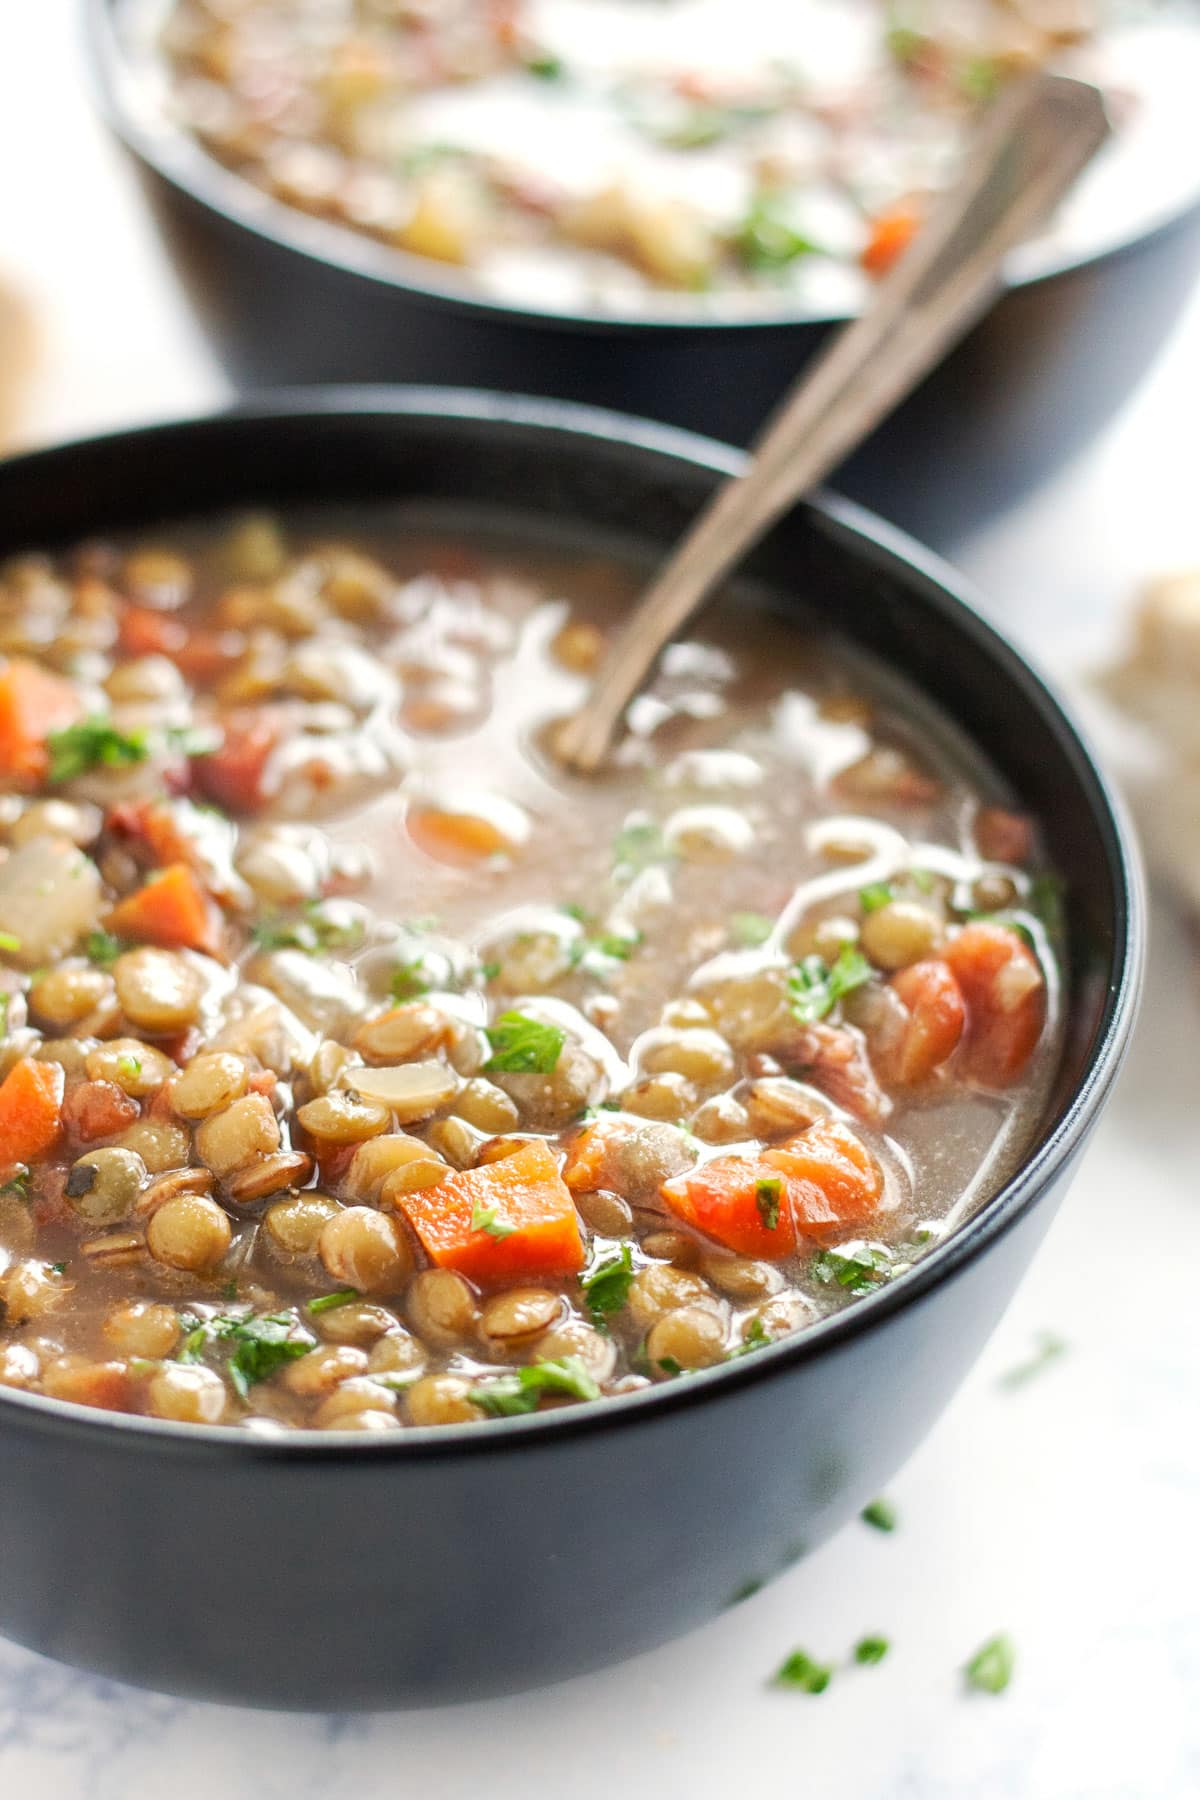 A close up image of the sde of a bowl of lentil soup with a spoon in it.